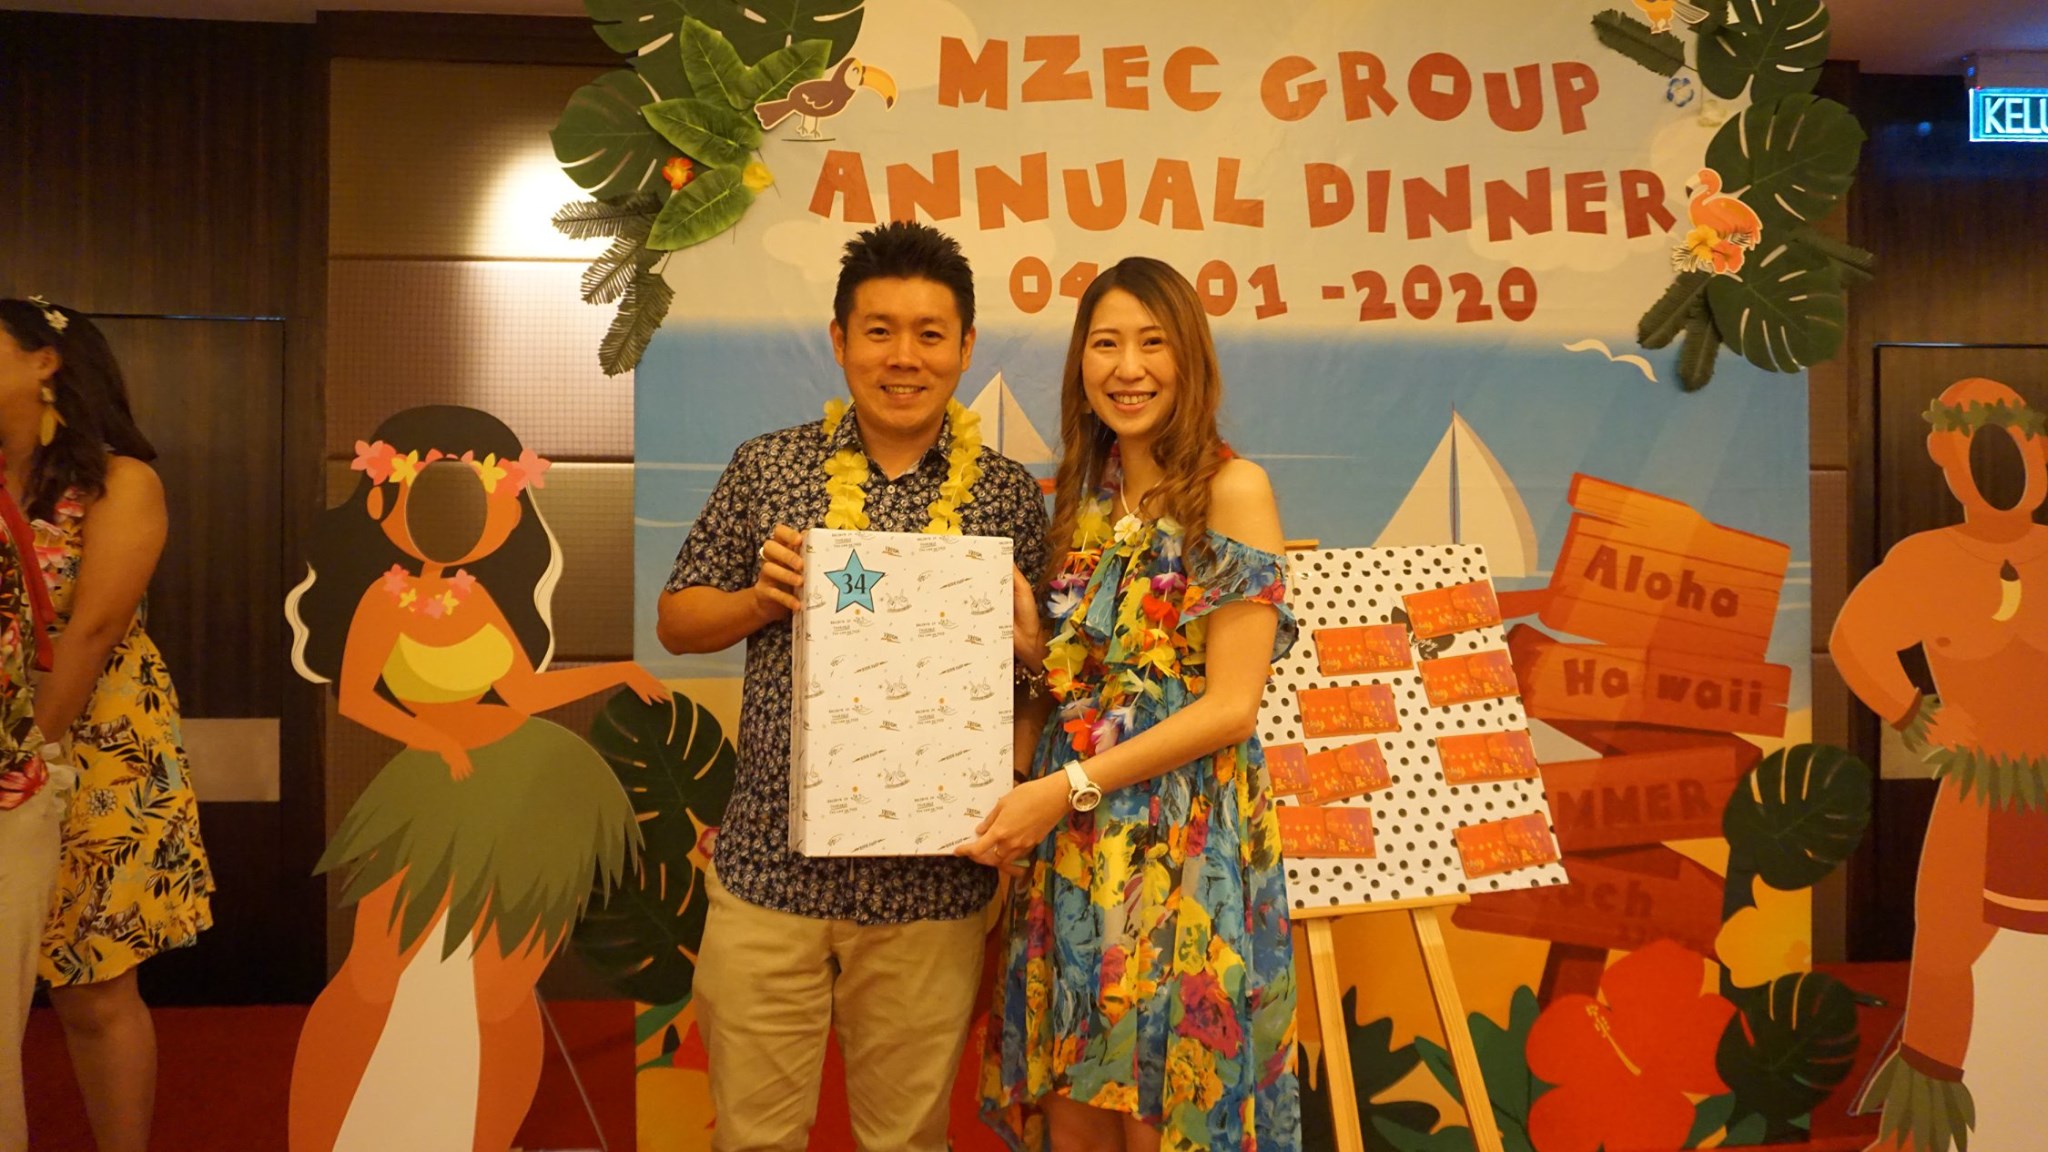 MZEC GROUP ANNUAL DINNER 2020 – MZEC Group of Companies